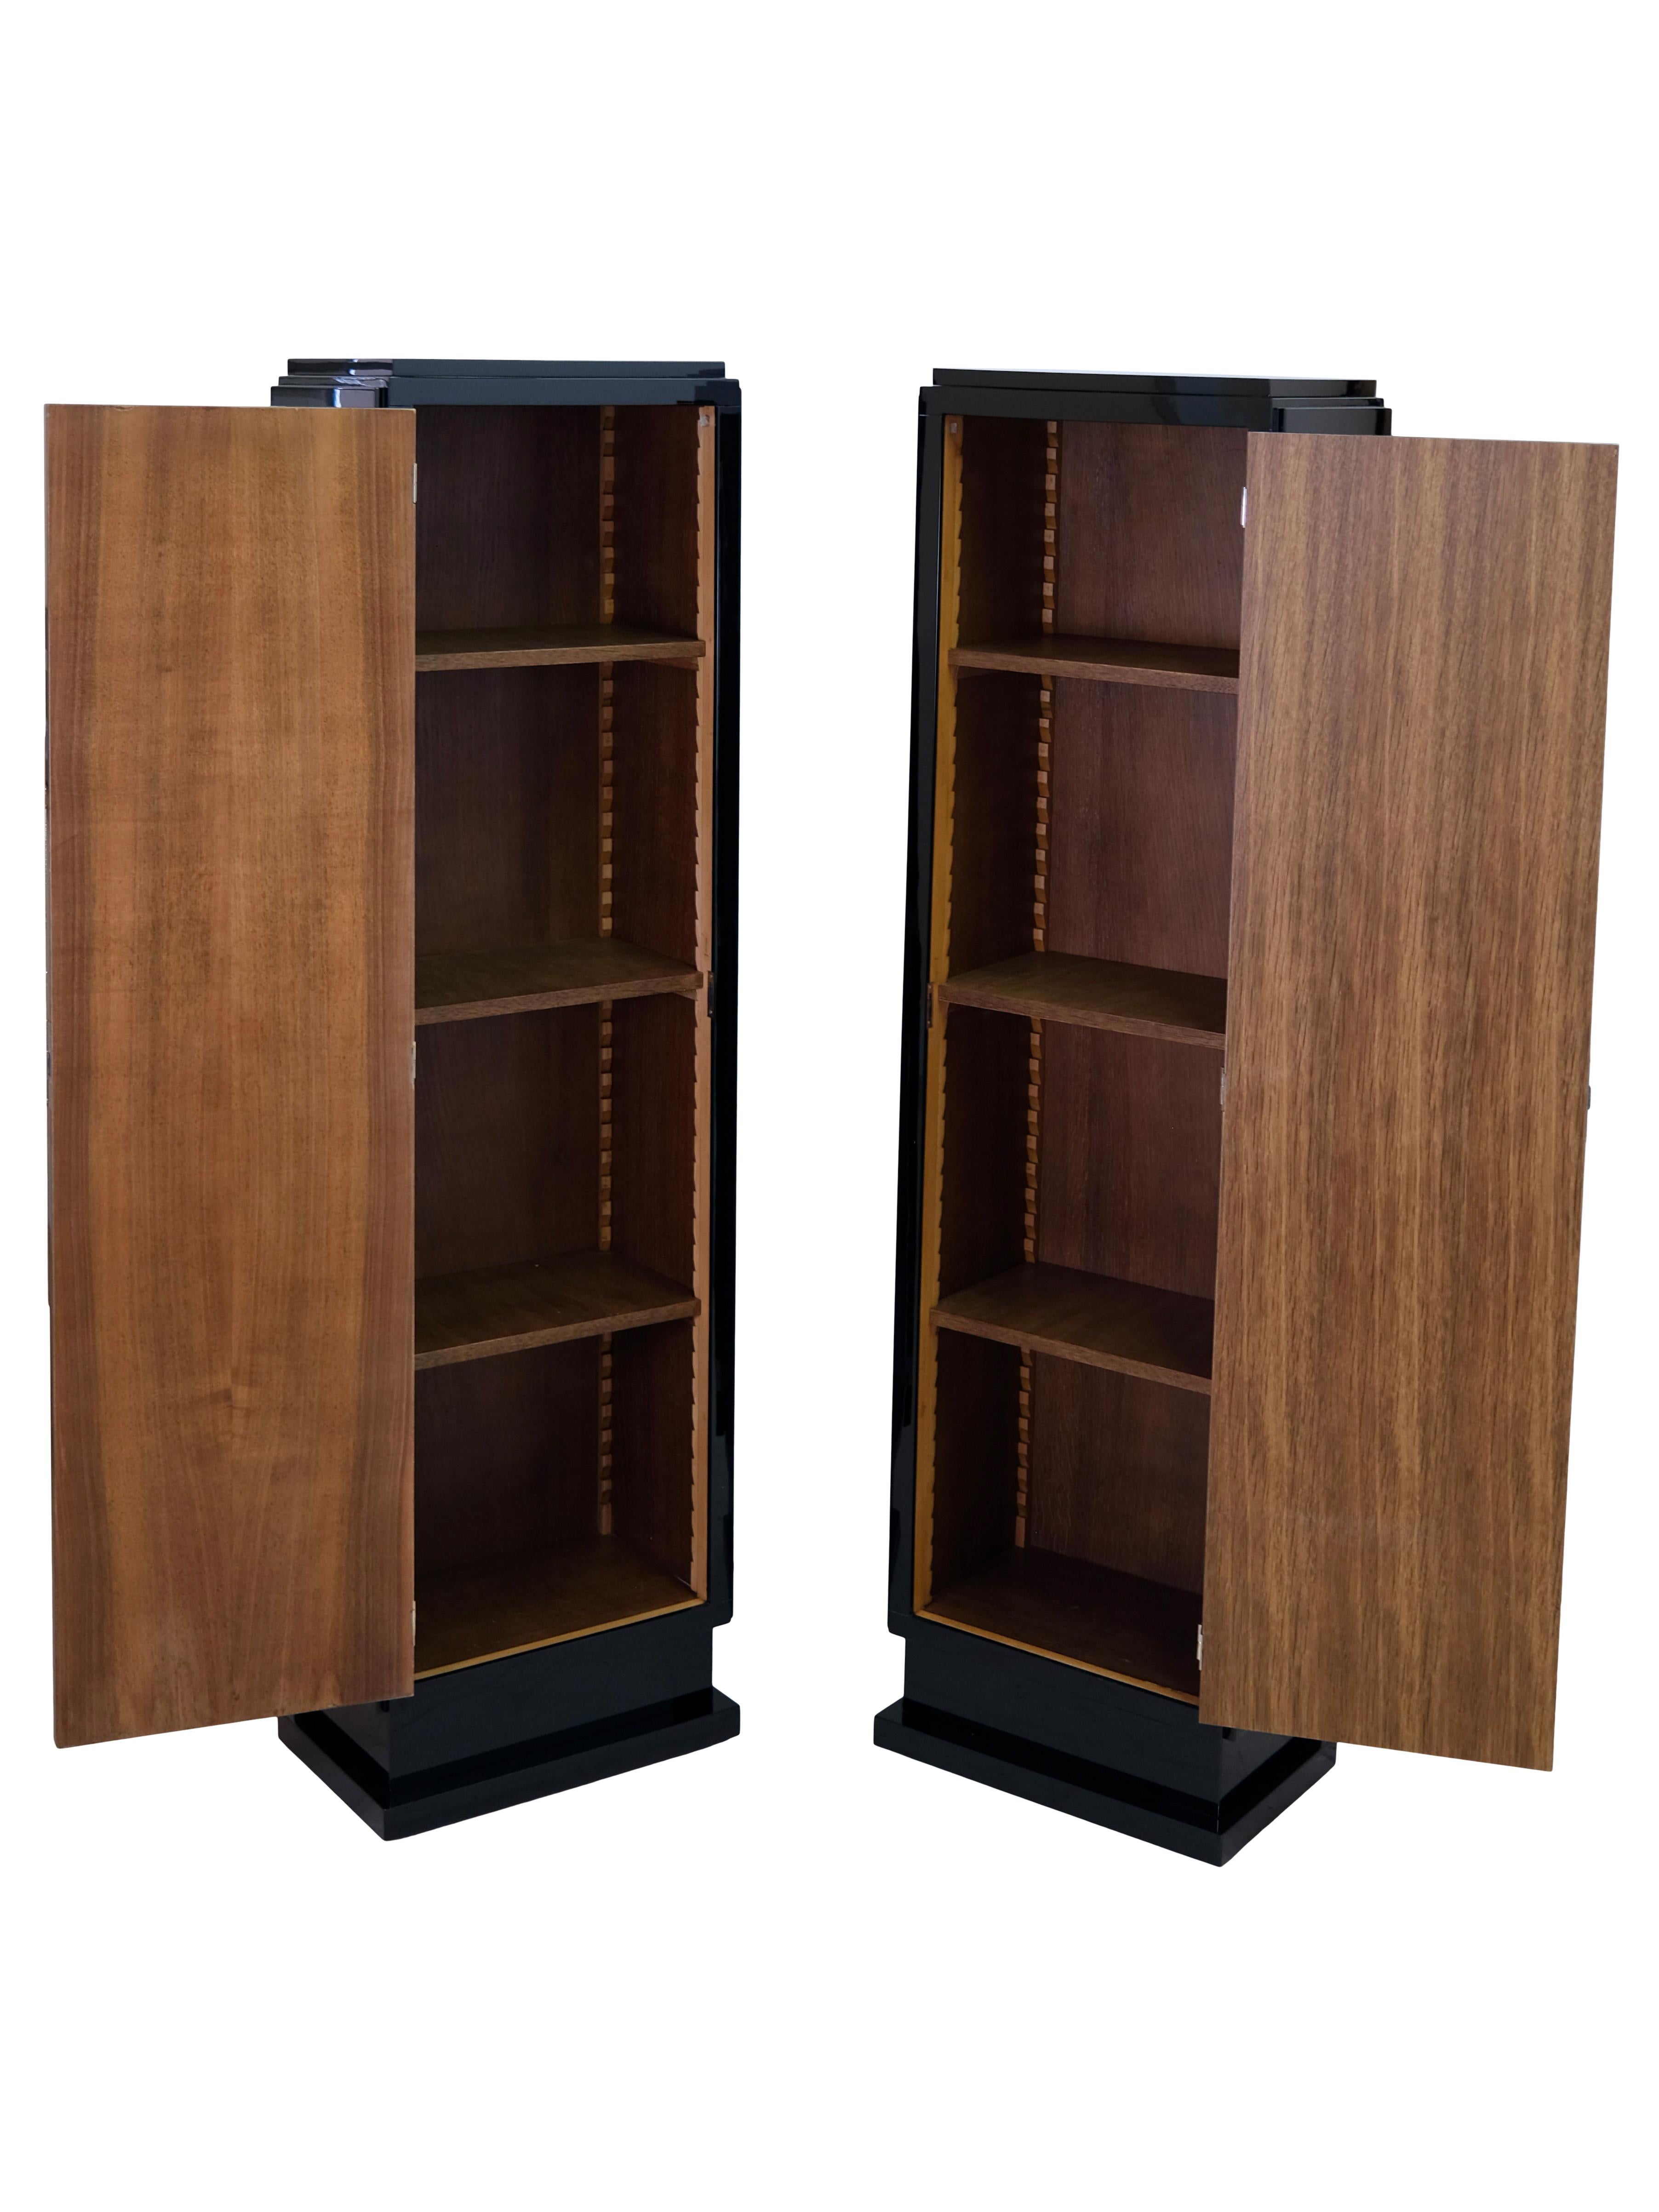 Blackened Set of 2 1930s French Art Deco Cabinets Black Piano Lacquer with Large Fittings For Sale